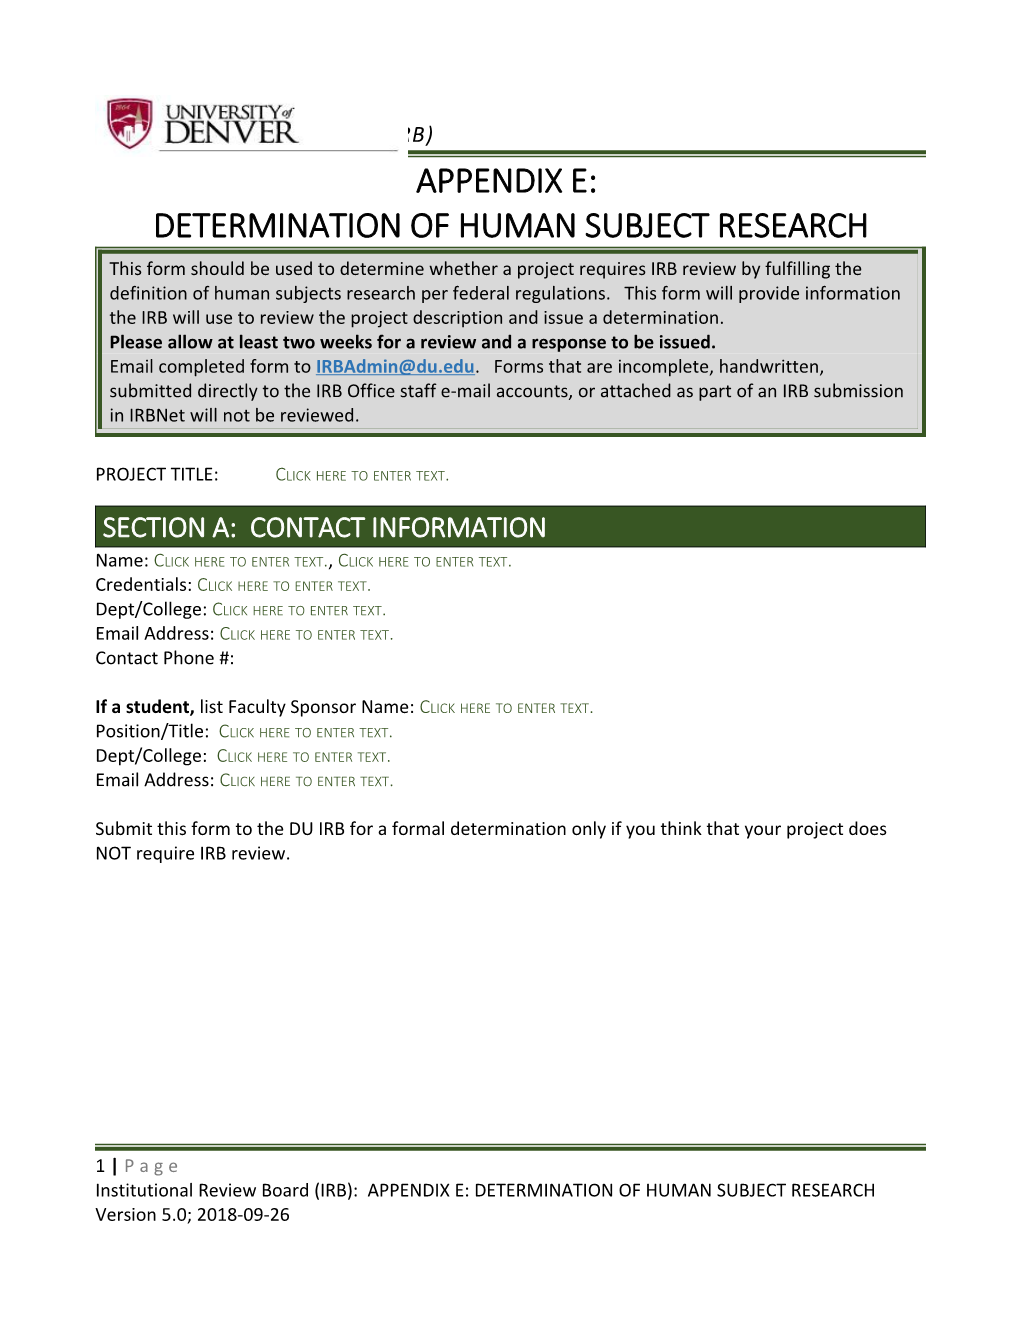 Determination of Human Subject Research